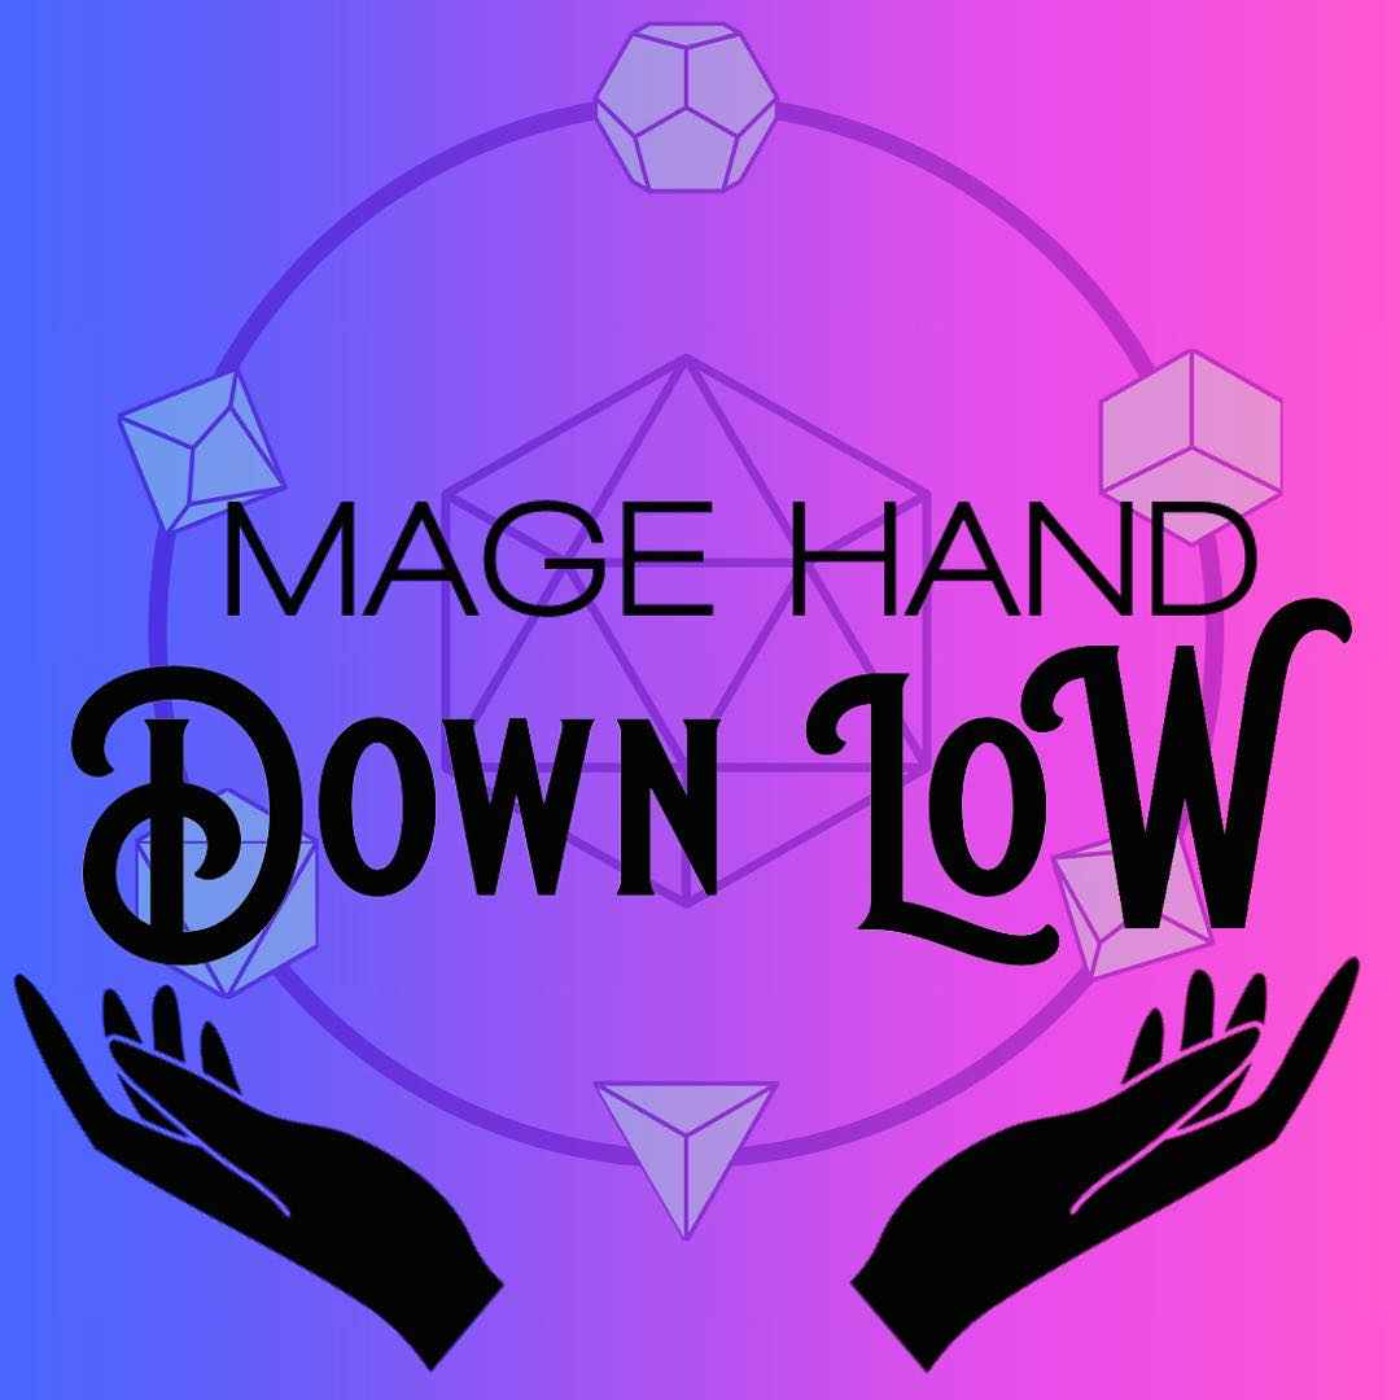 Mage Hand Down Low: The Badlands Ep. 1 - All Aboard (A Patreon Preview)